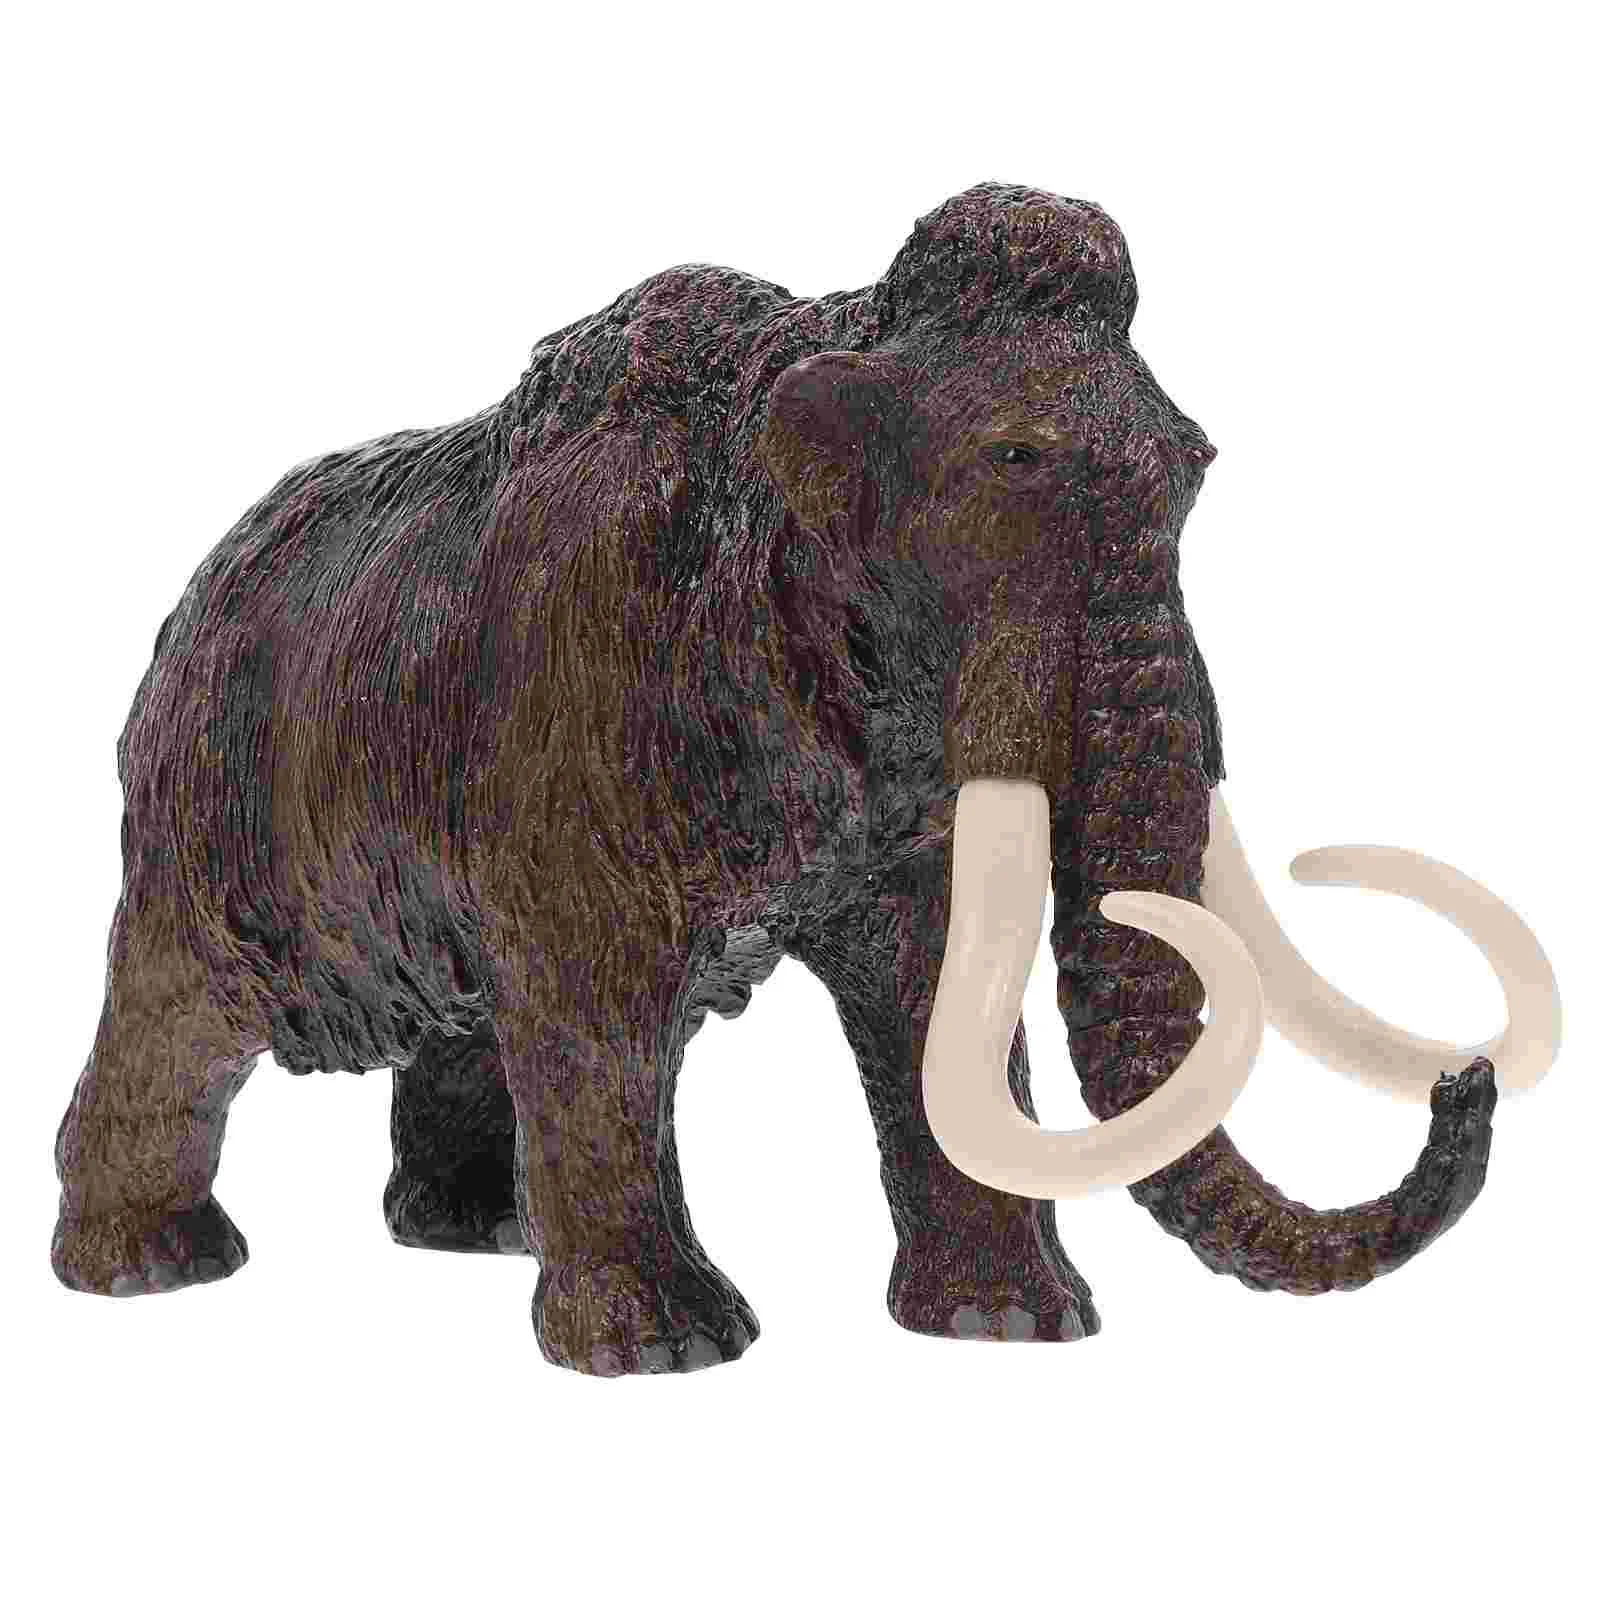 

Educational Toys Mammoth Calf Toy Number Elephant Figurines Home Decor Mammoth Figurine Child